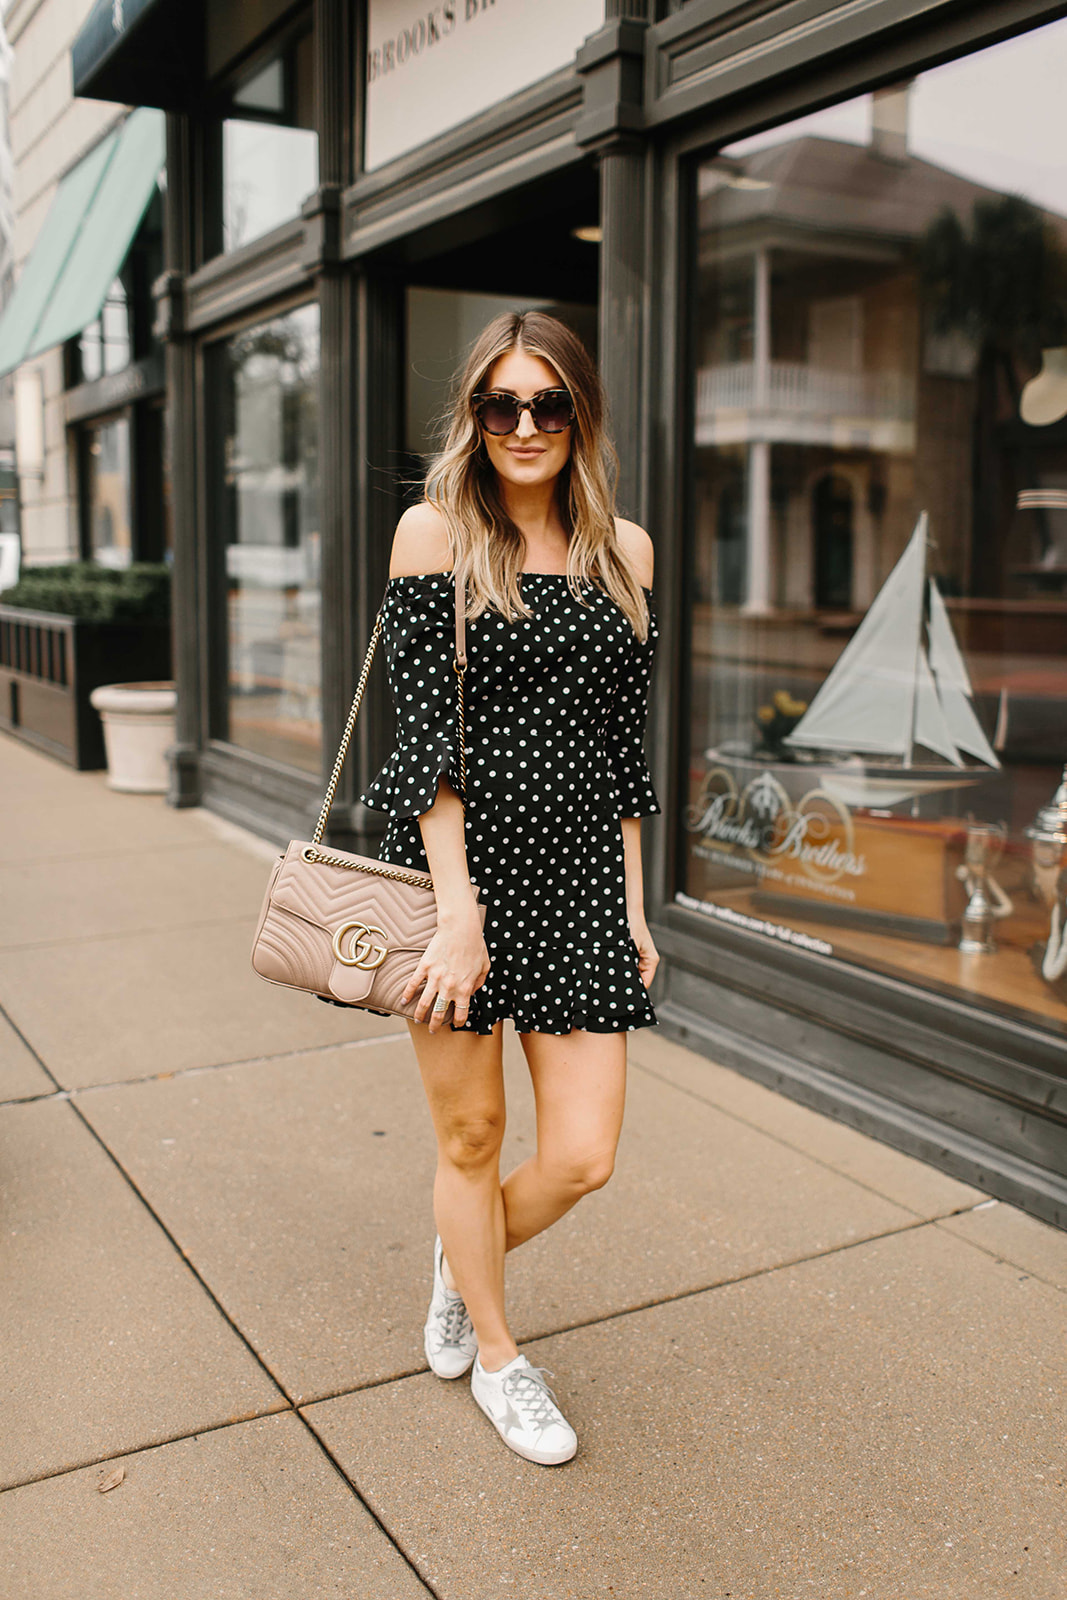 HOW TO STYLE SNEAKERS WITH DRESSES - Merrick's Art | Dress and sneakers  outfit, White sneakers outfit, Dress with sneakers